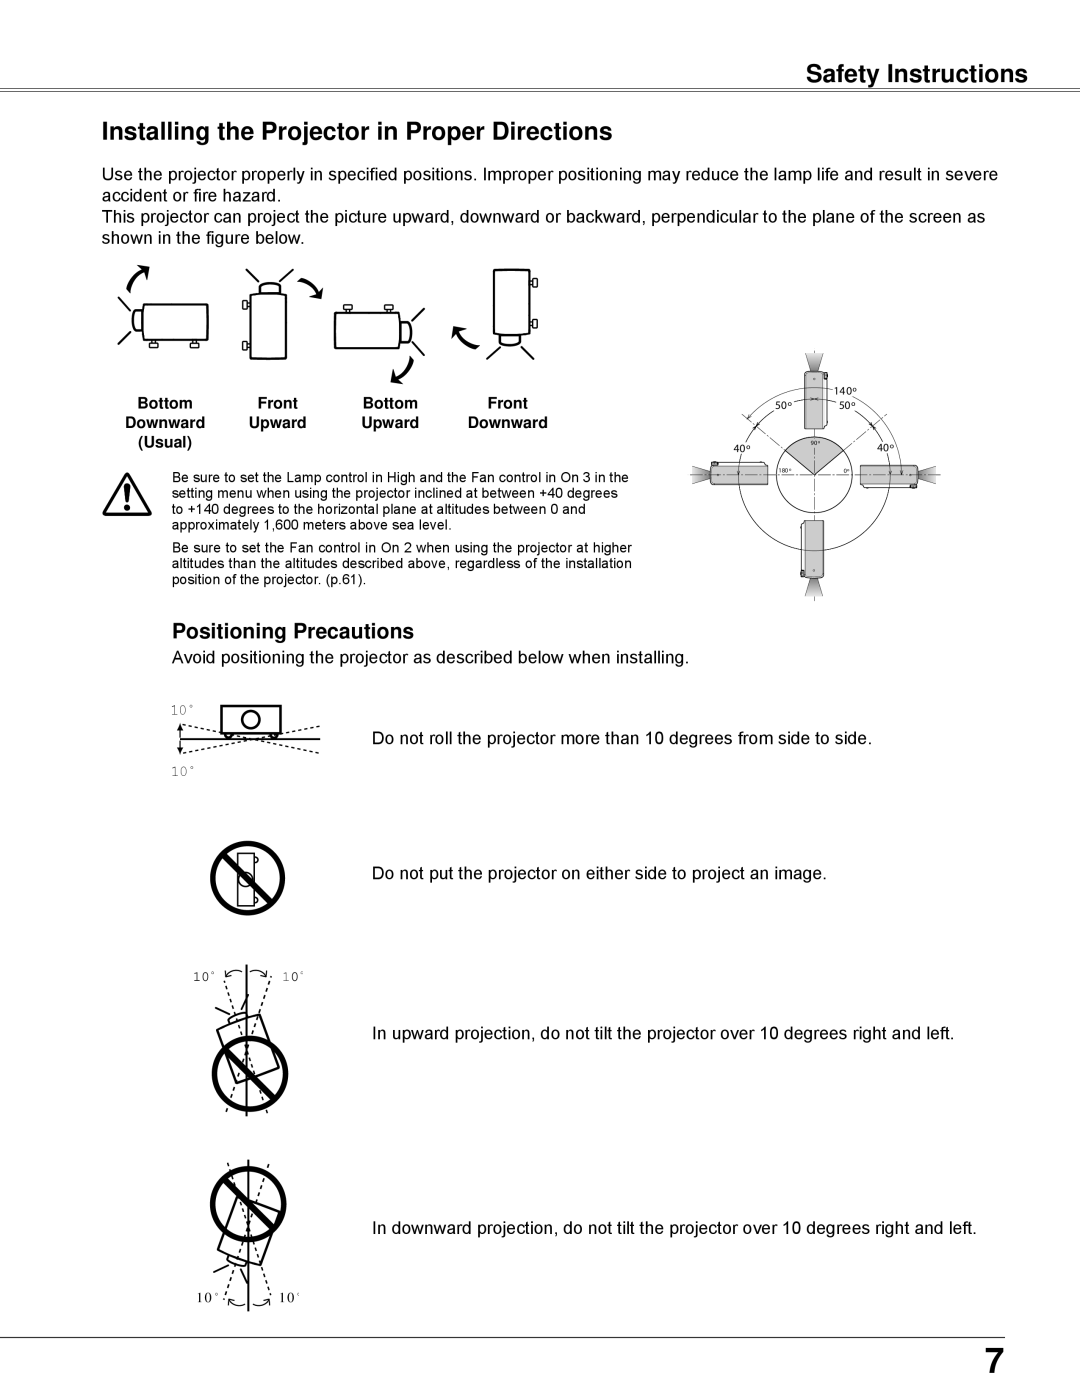 Sanyo PLC-WXU700 owner manual Safety Instructions Installing the Projector in Proper Directions, Positioning Precautions 